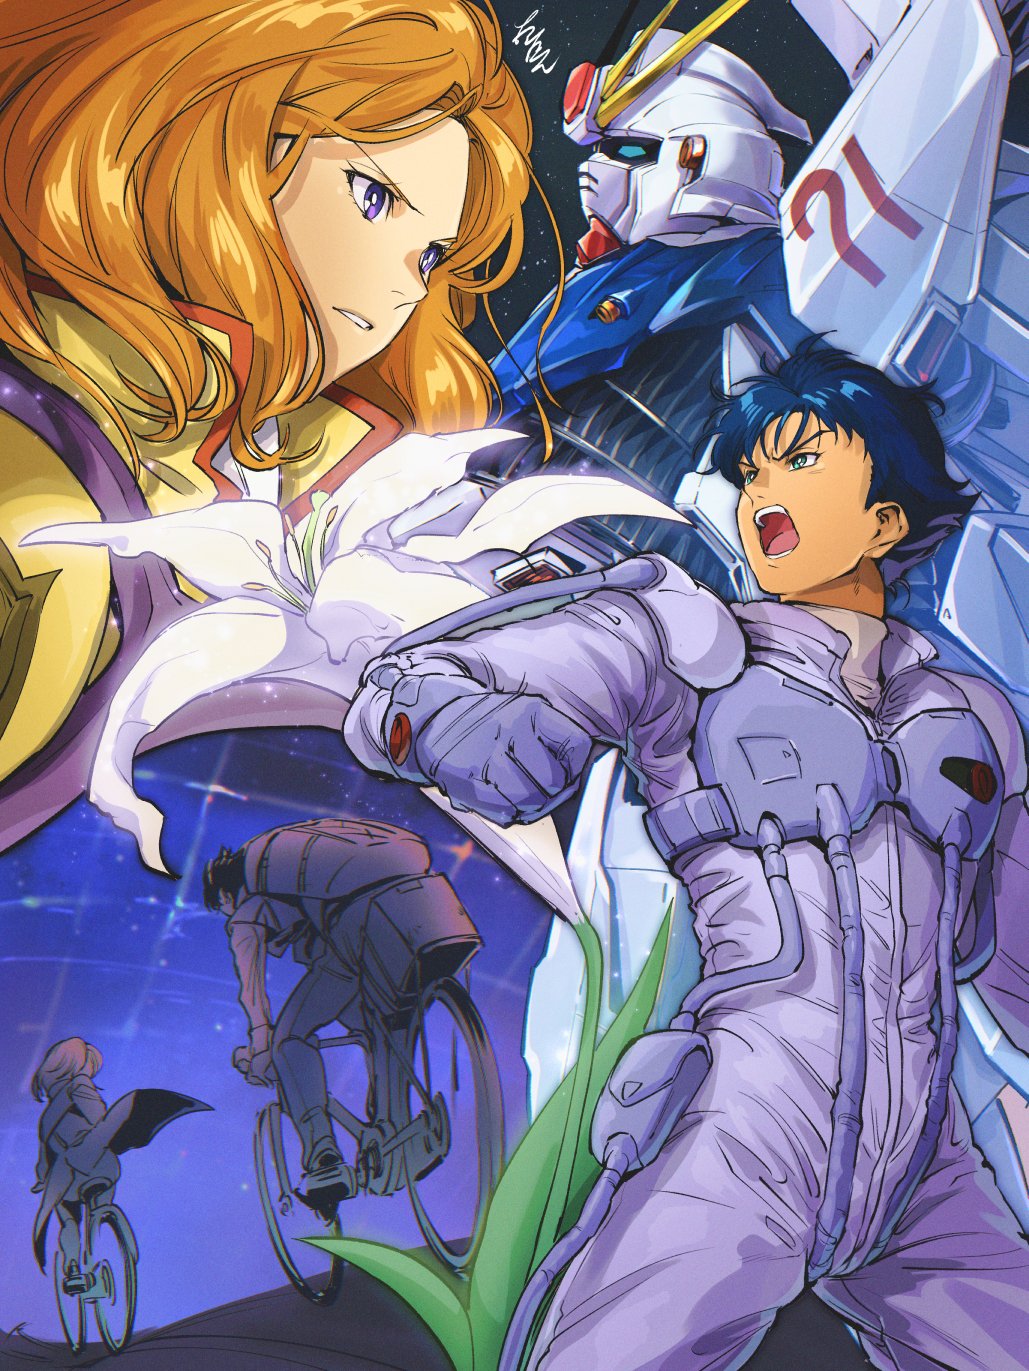 1boy 1girl backpack bag bicycle blue_eyes blue_hair cecily_fairchild chanmura clenched_hand f91_gundam flower gloves grey_gloves grey_shirt ground_vehicle gundam gundam_f91 hair_behind_ear highres jumpsuit looking_ahead mecha mobile_suit multiple_views orange_hair pants parted_lips purple_jumpsuit riding riding_bicycle robot seabook_arno shirt short_hair space v-fin v-shaped_eyebrows violet_eyes white_flower white_shirt yellow_jumpsuit